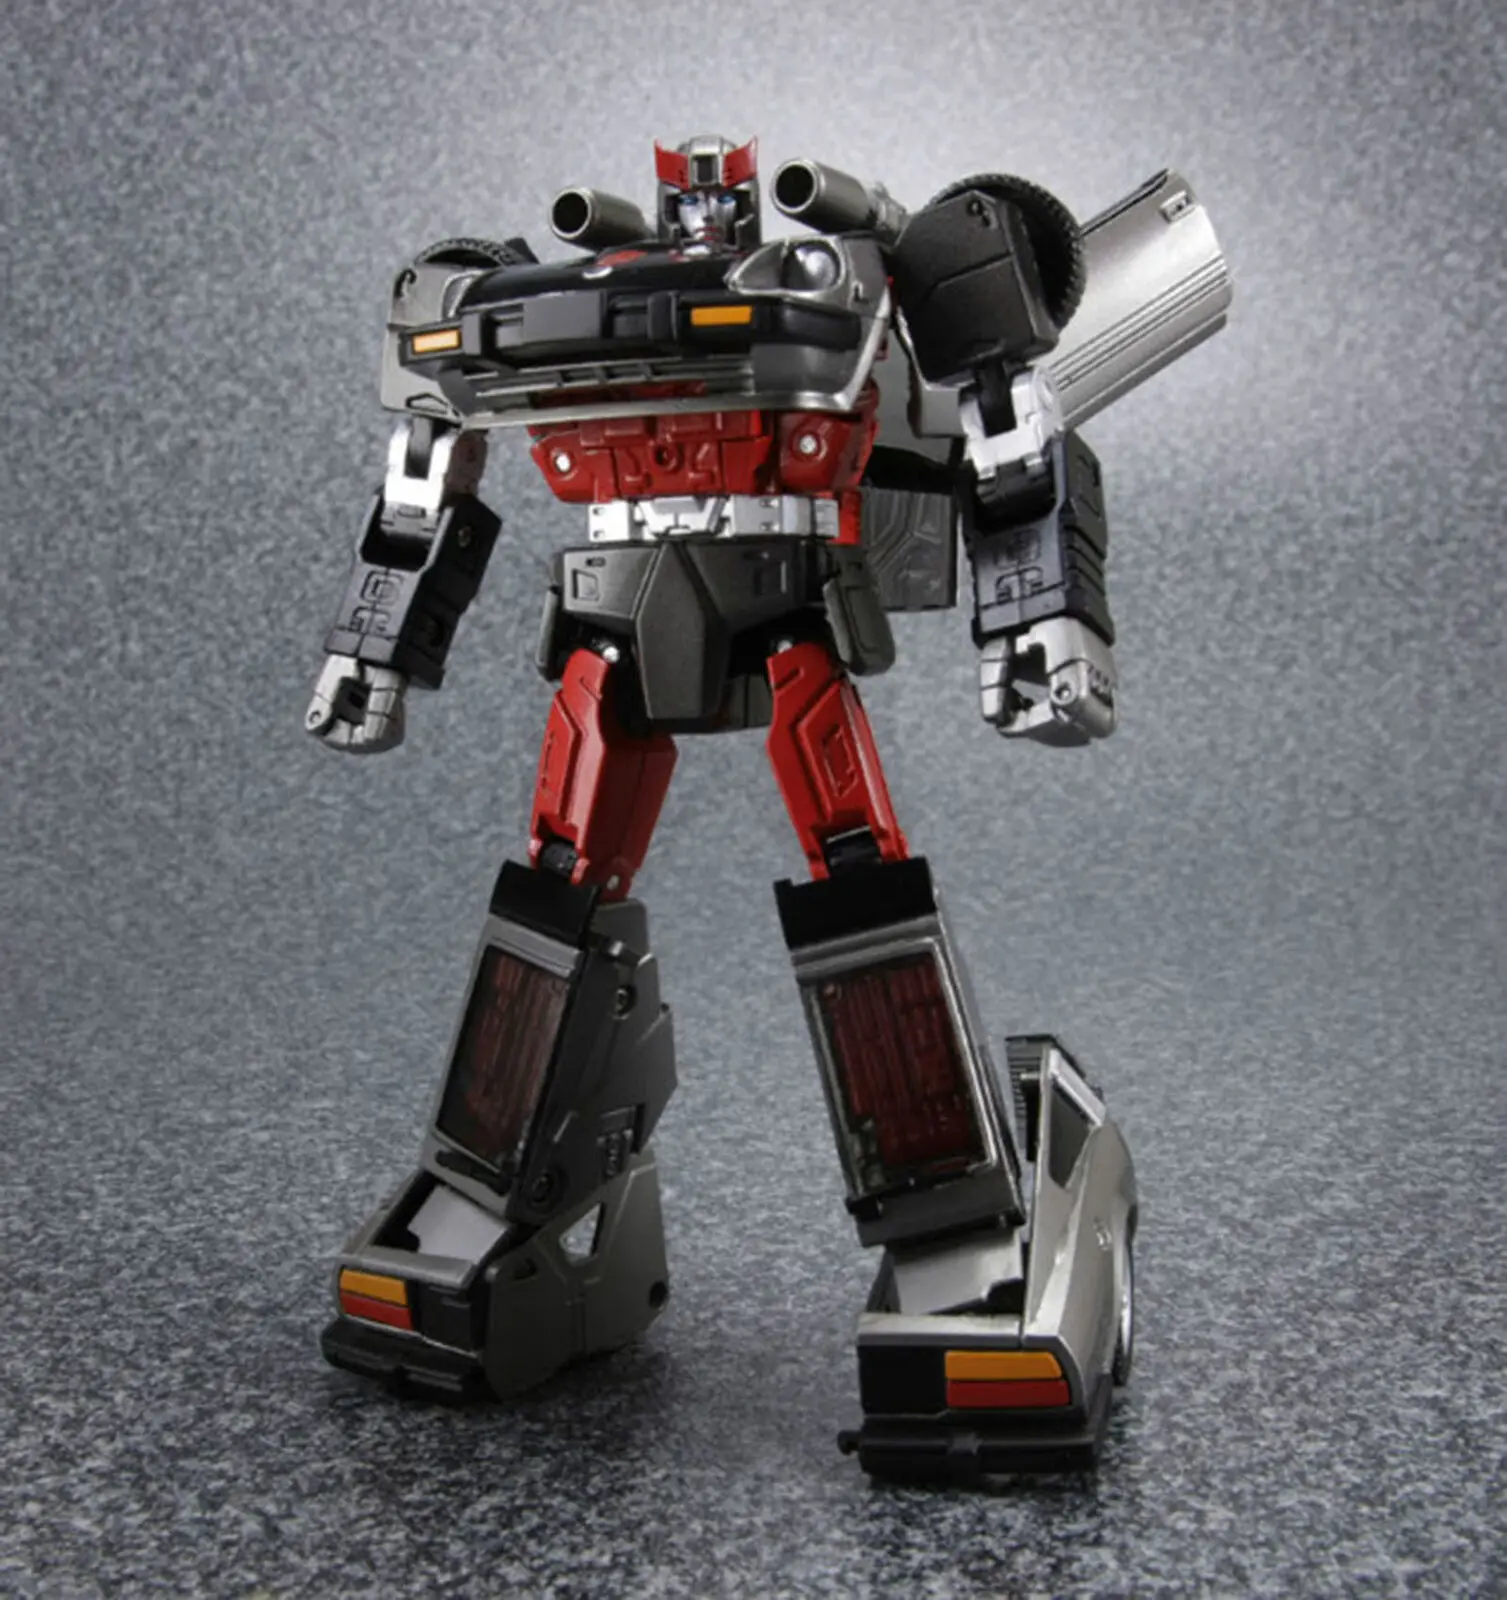 

Transformers Masterpiece MP-18 MP18 STREAK Autobots Action Figure Model Toy Gifts Kids